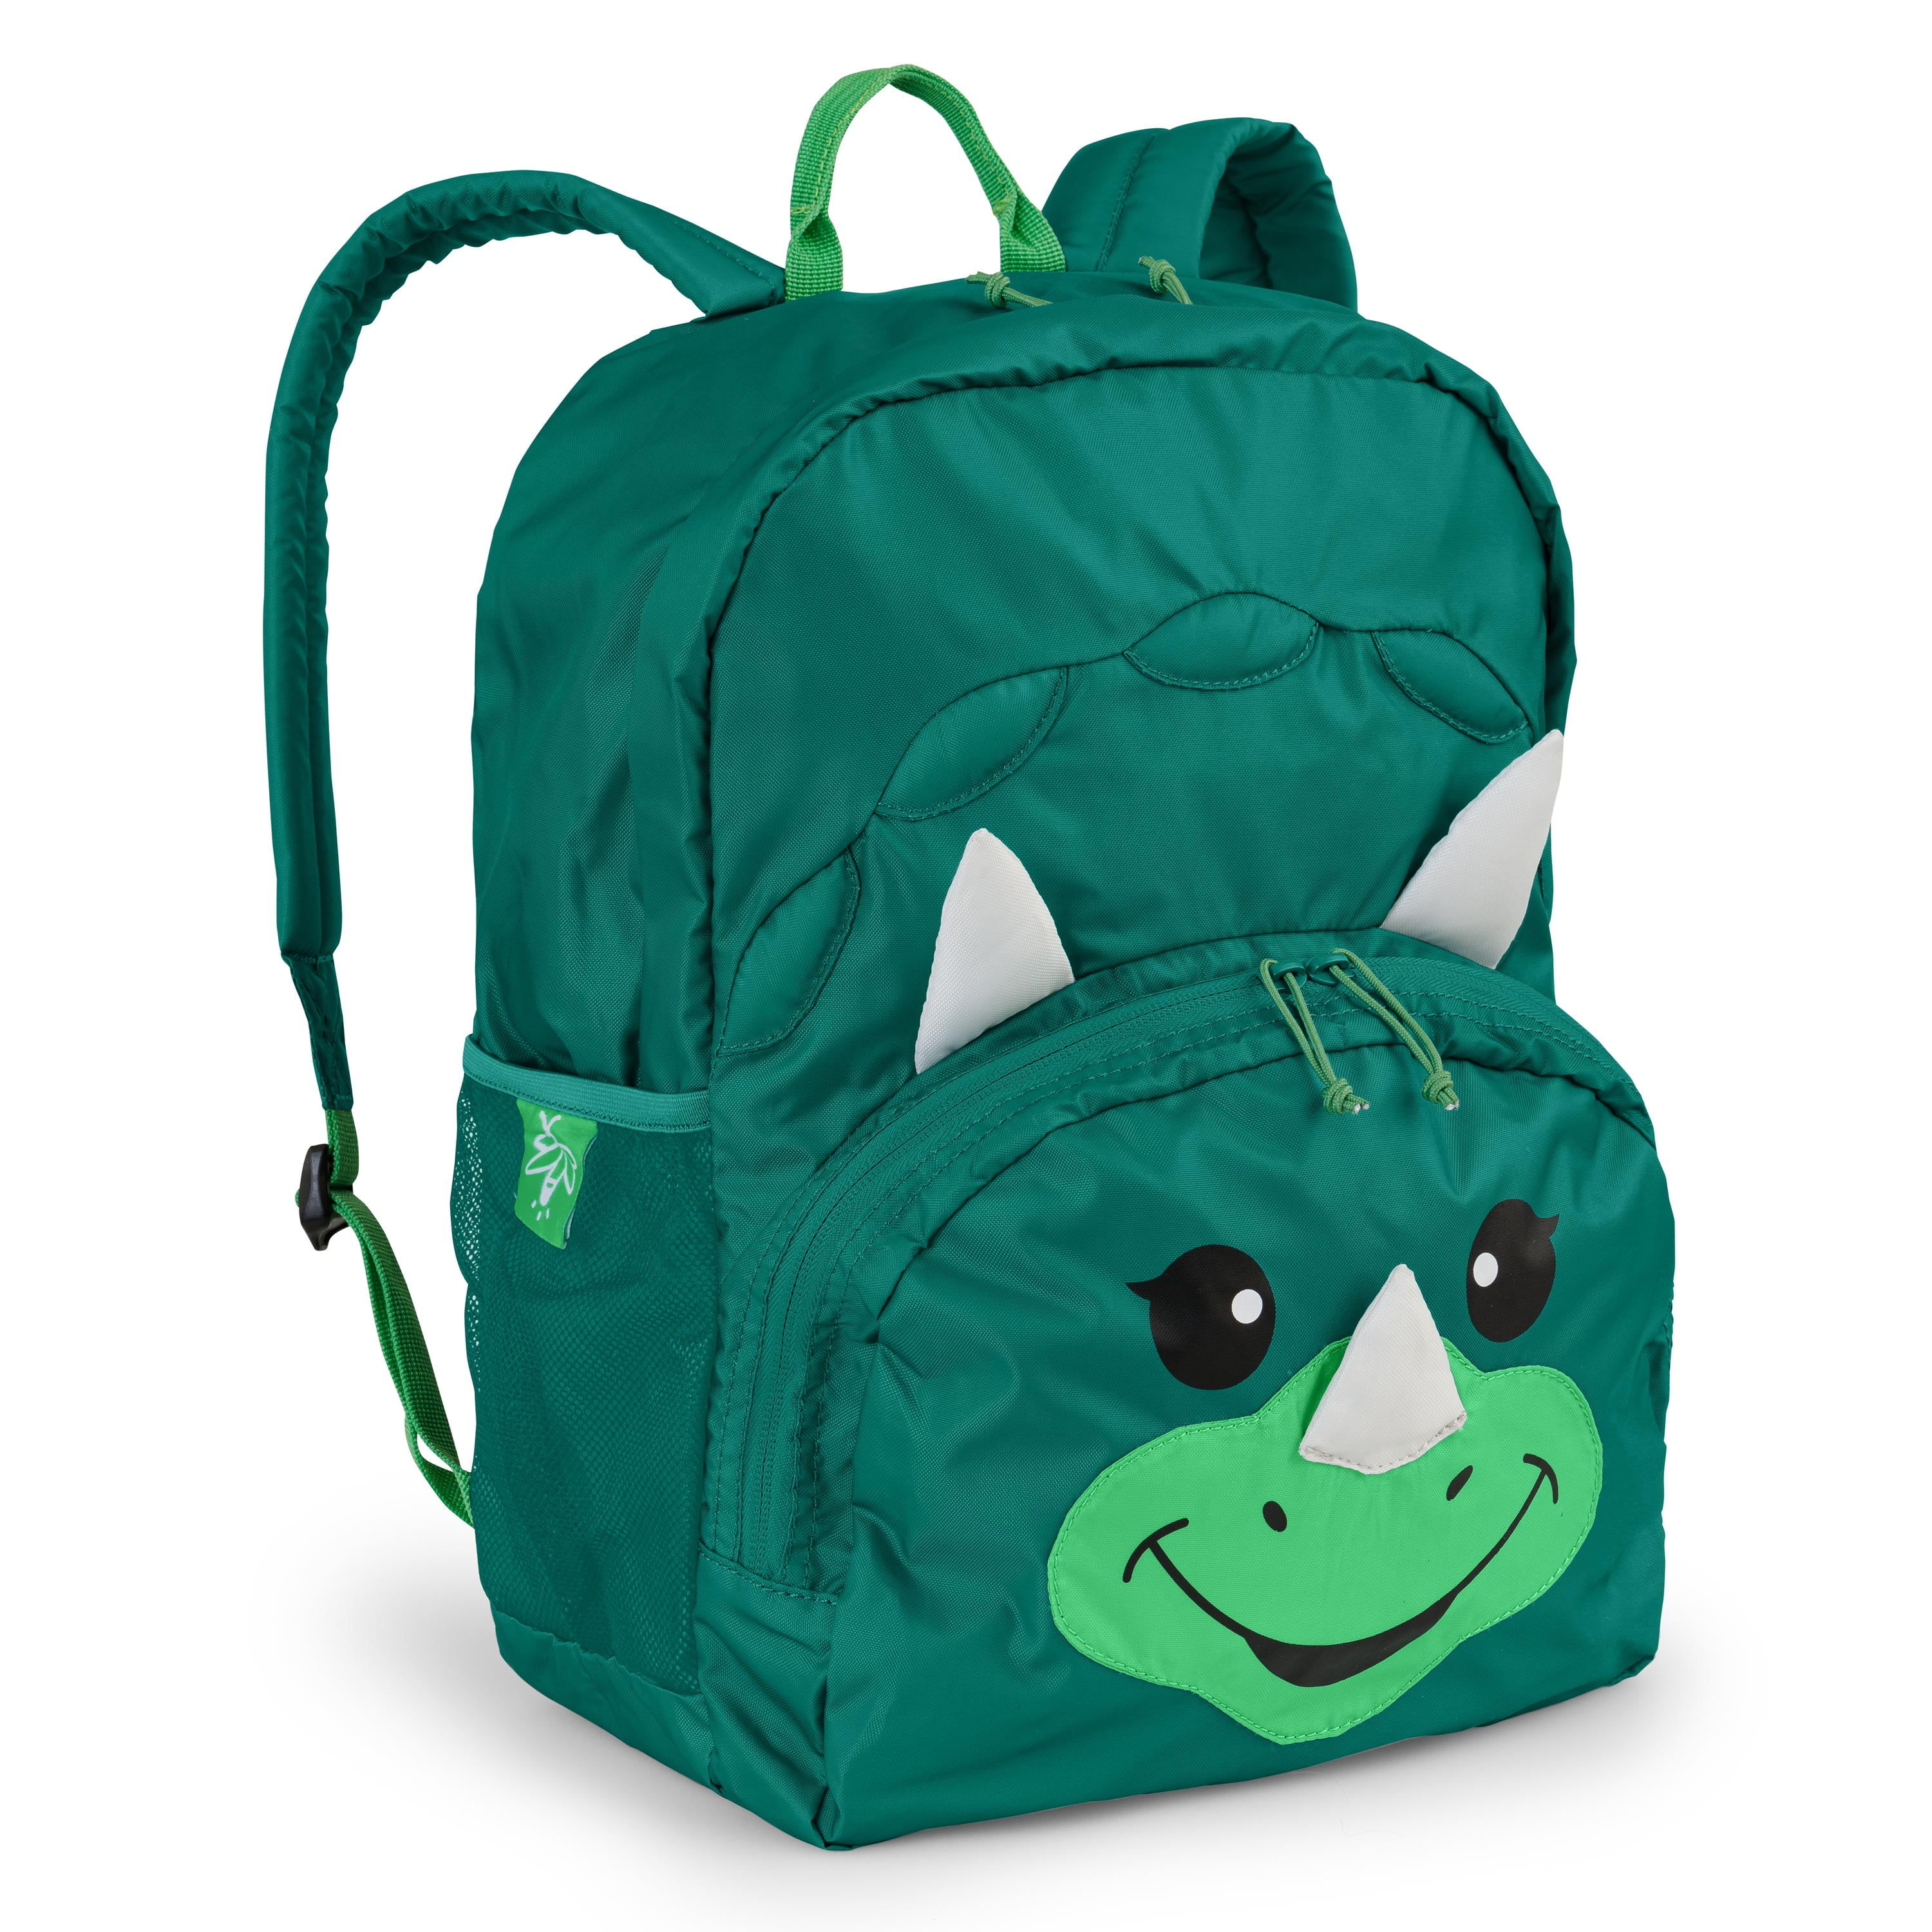 Firefly! Outdoor Gear Chip the Dinosaur Kid's Backpack - Green (15 Liters),  Unisex